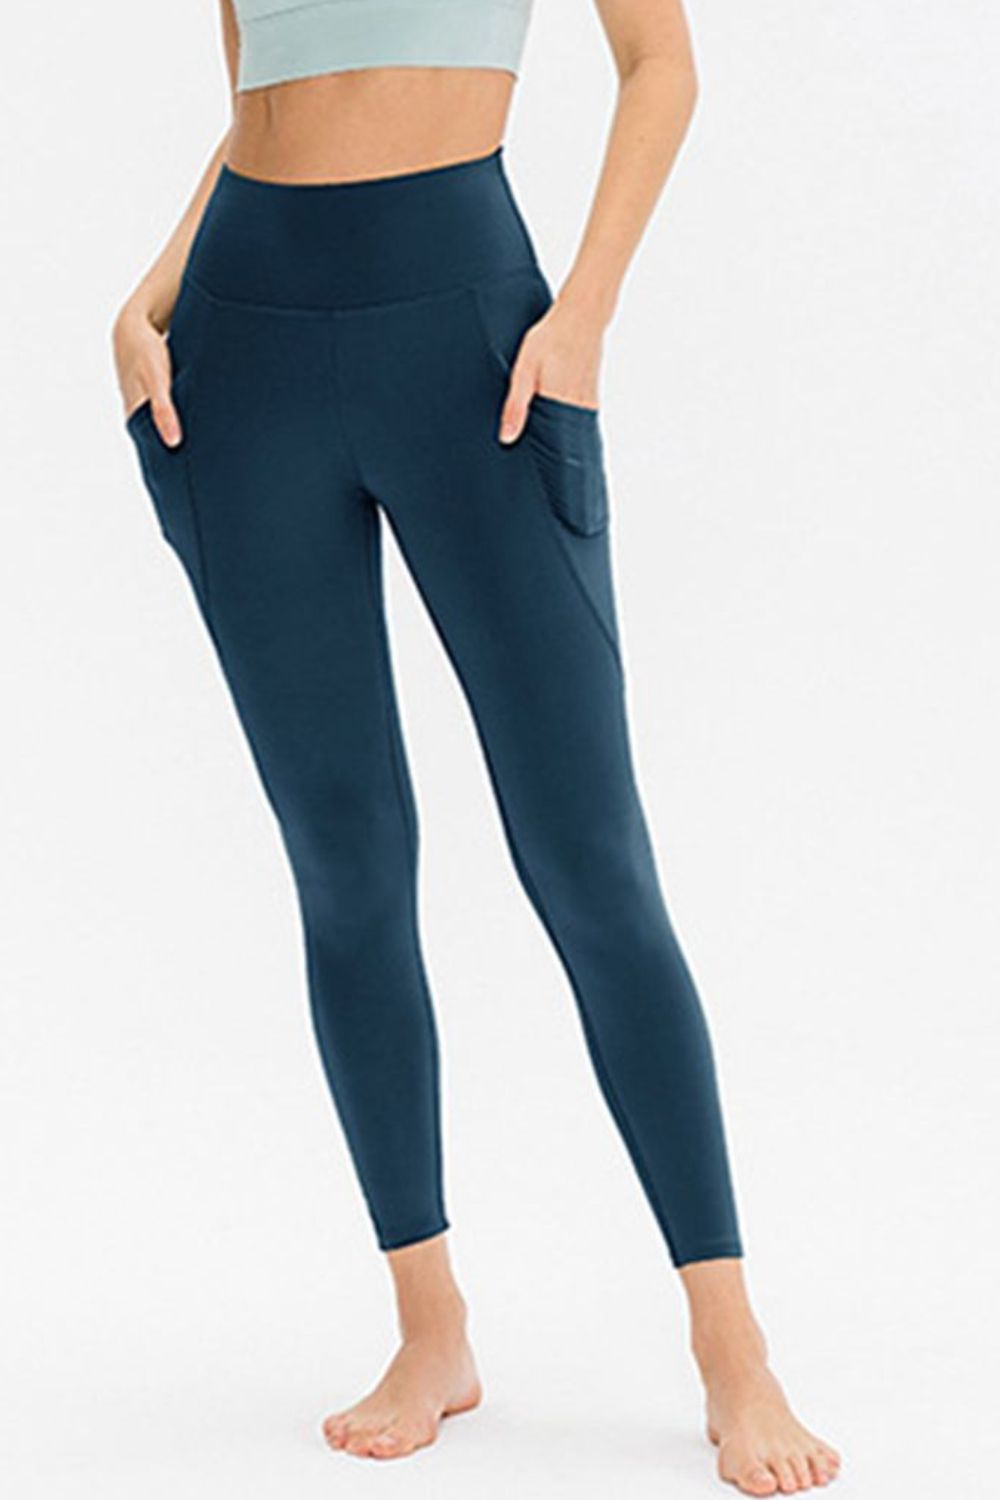 Slim Fit Long Active Leggings with Pockets - Women’s Clothing & Accessories - Activewear - 15 - 2024